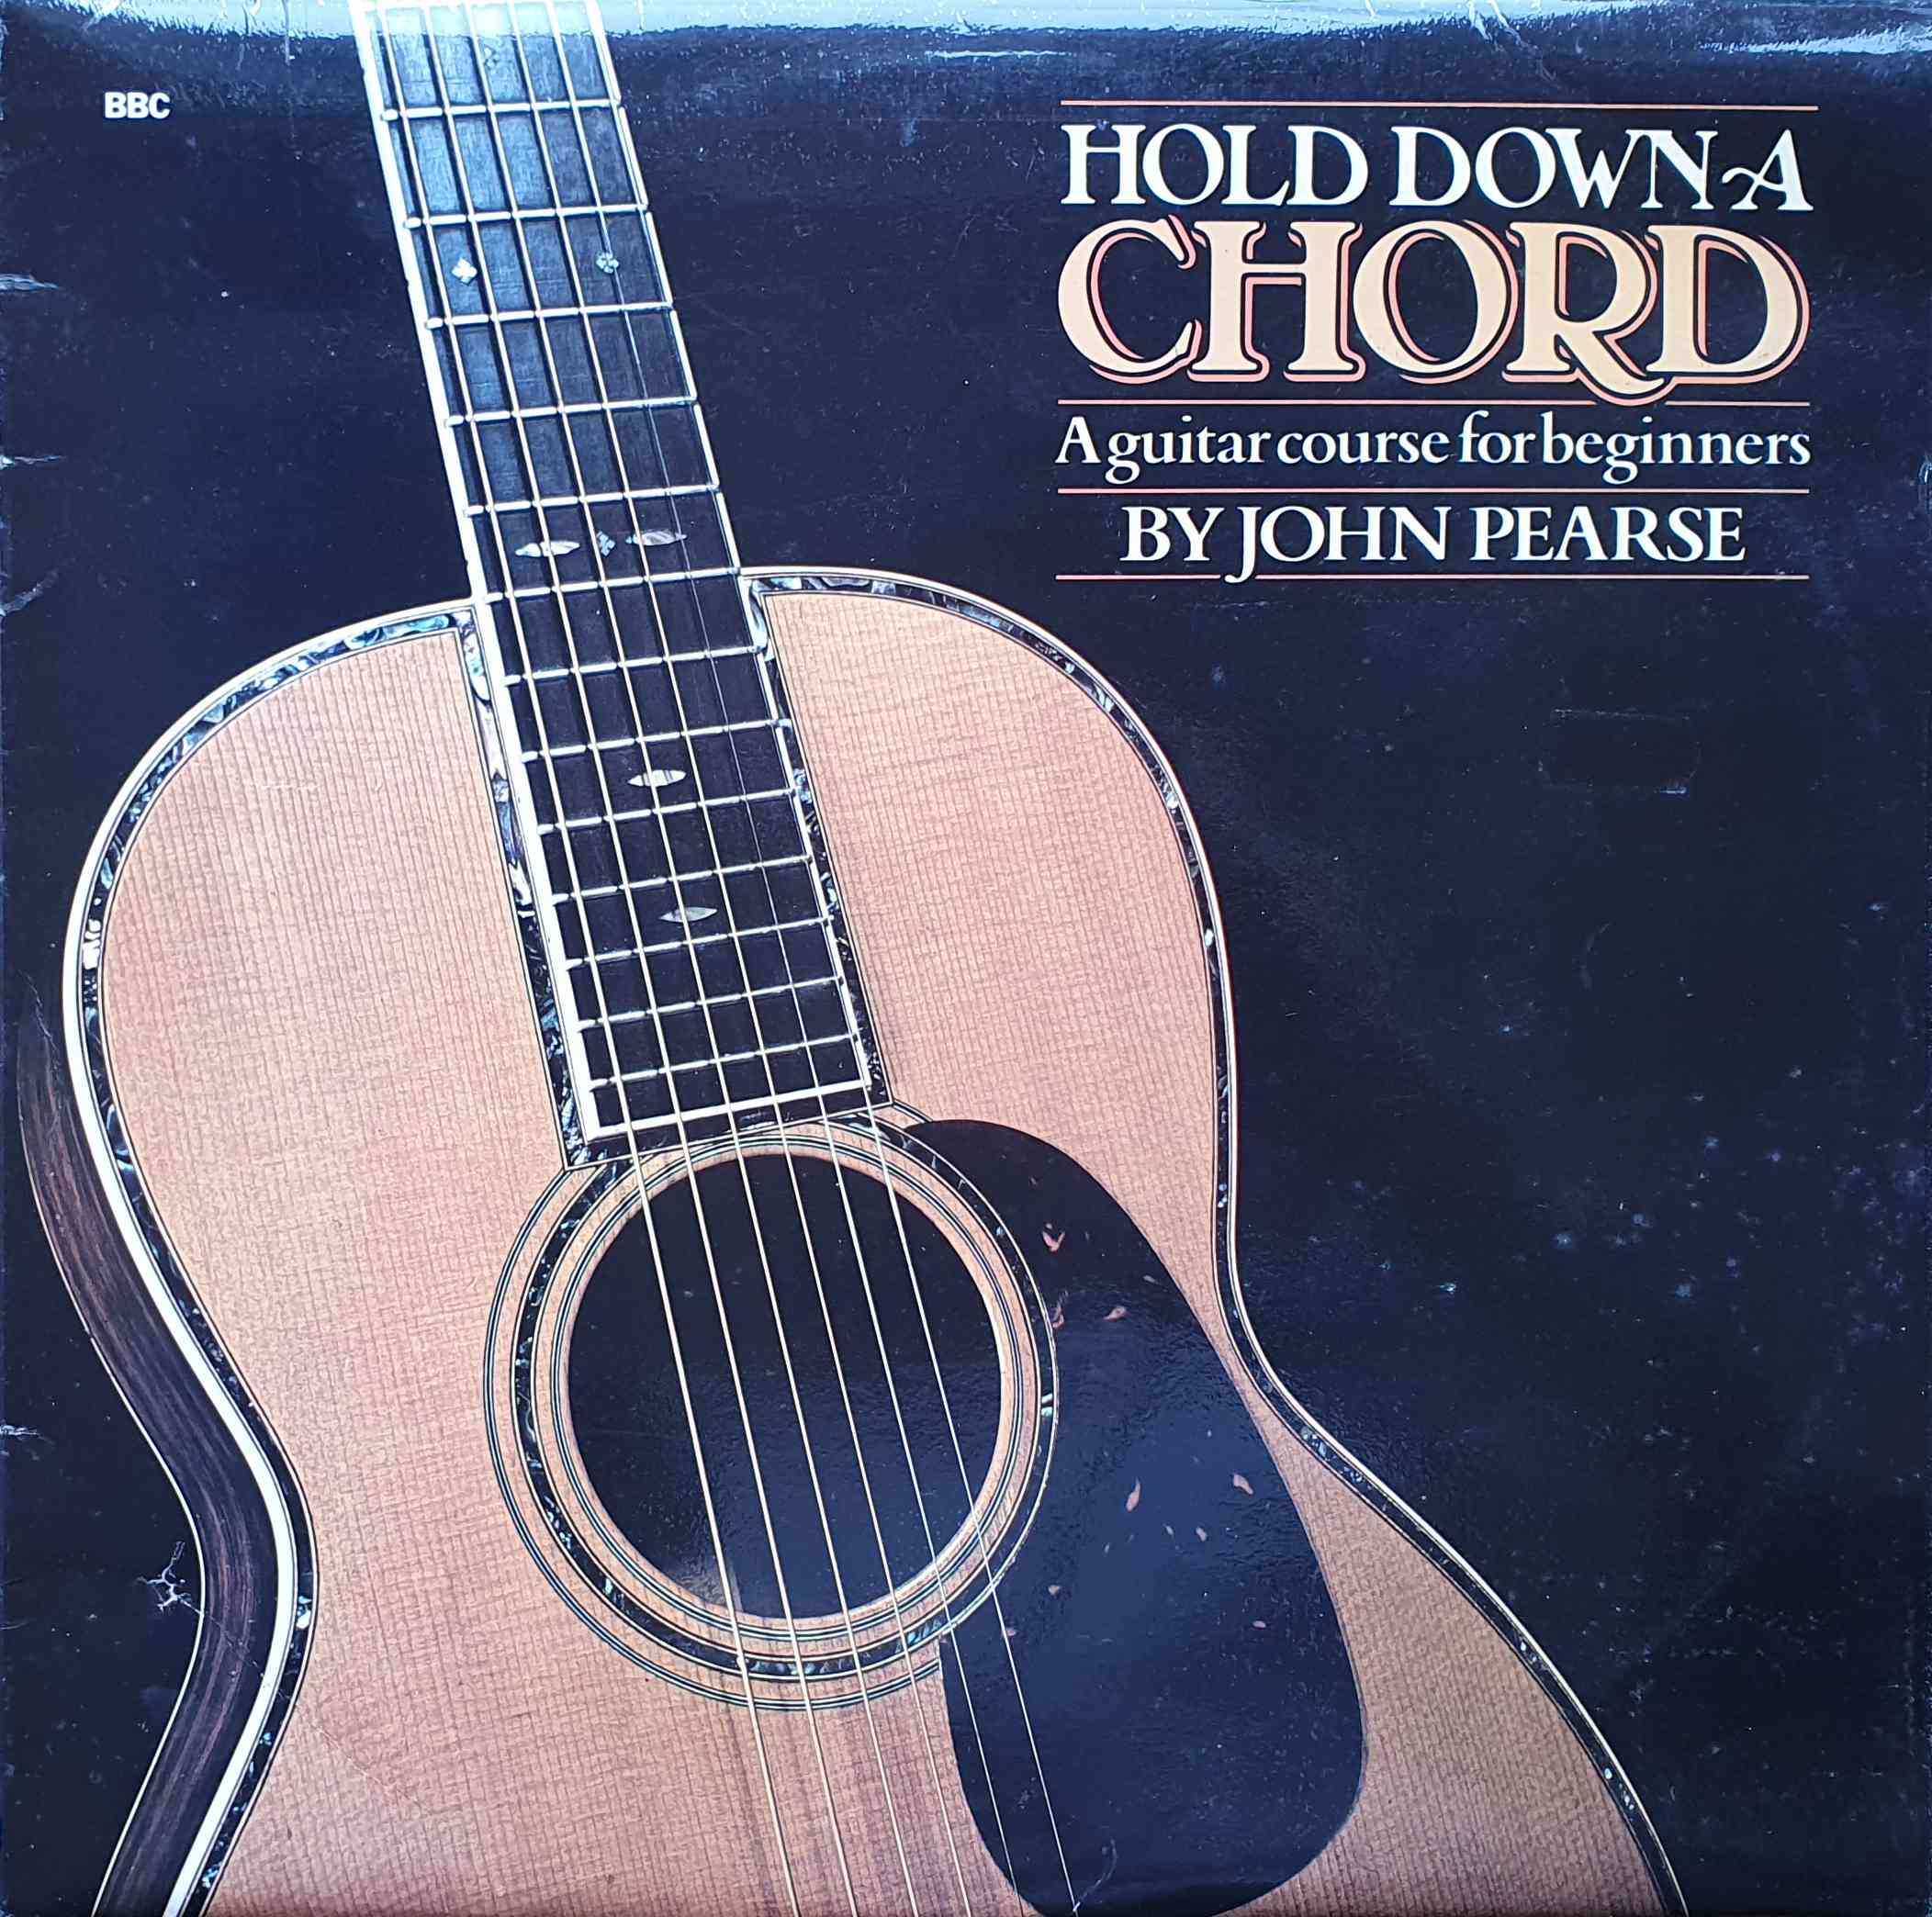 Picture of OP 257 Hold down a chord - A guitar course for beginners by artist John Pearse from the BBC albums - Records and Tapes library